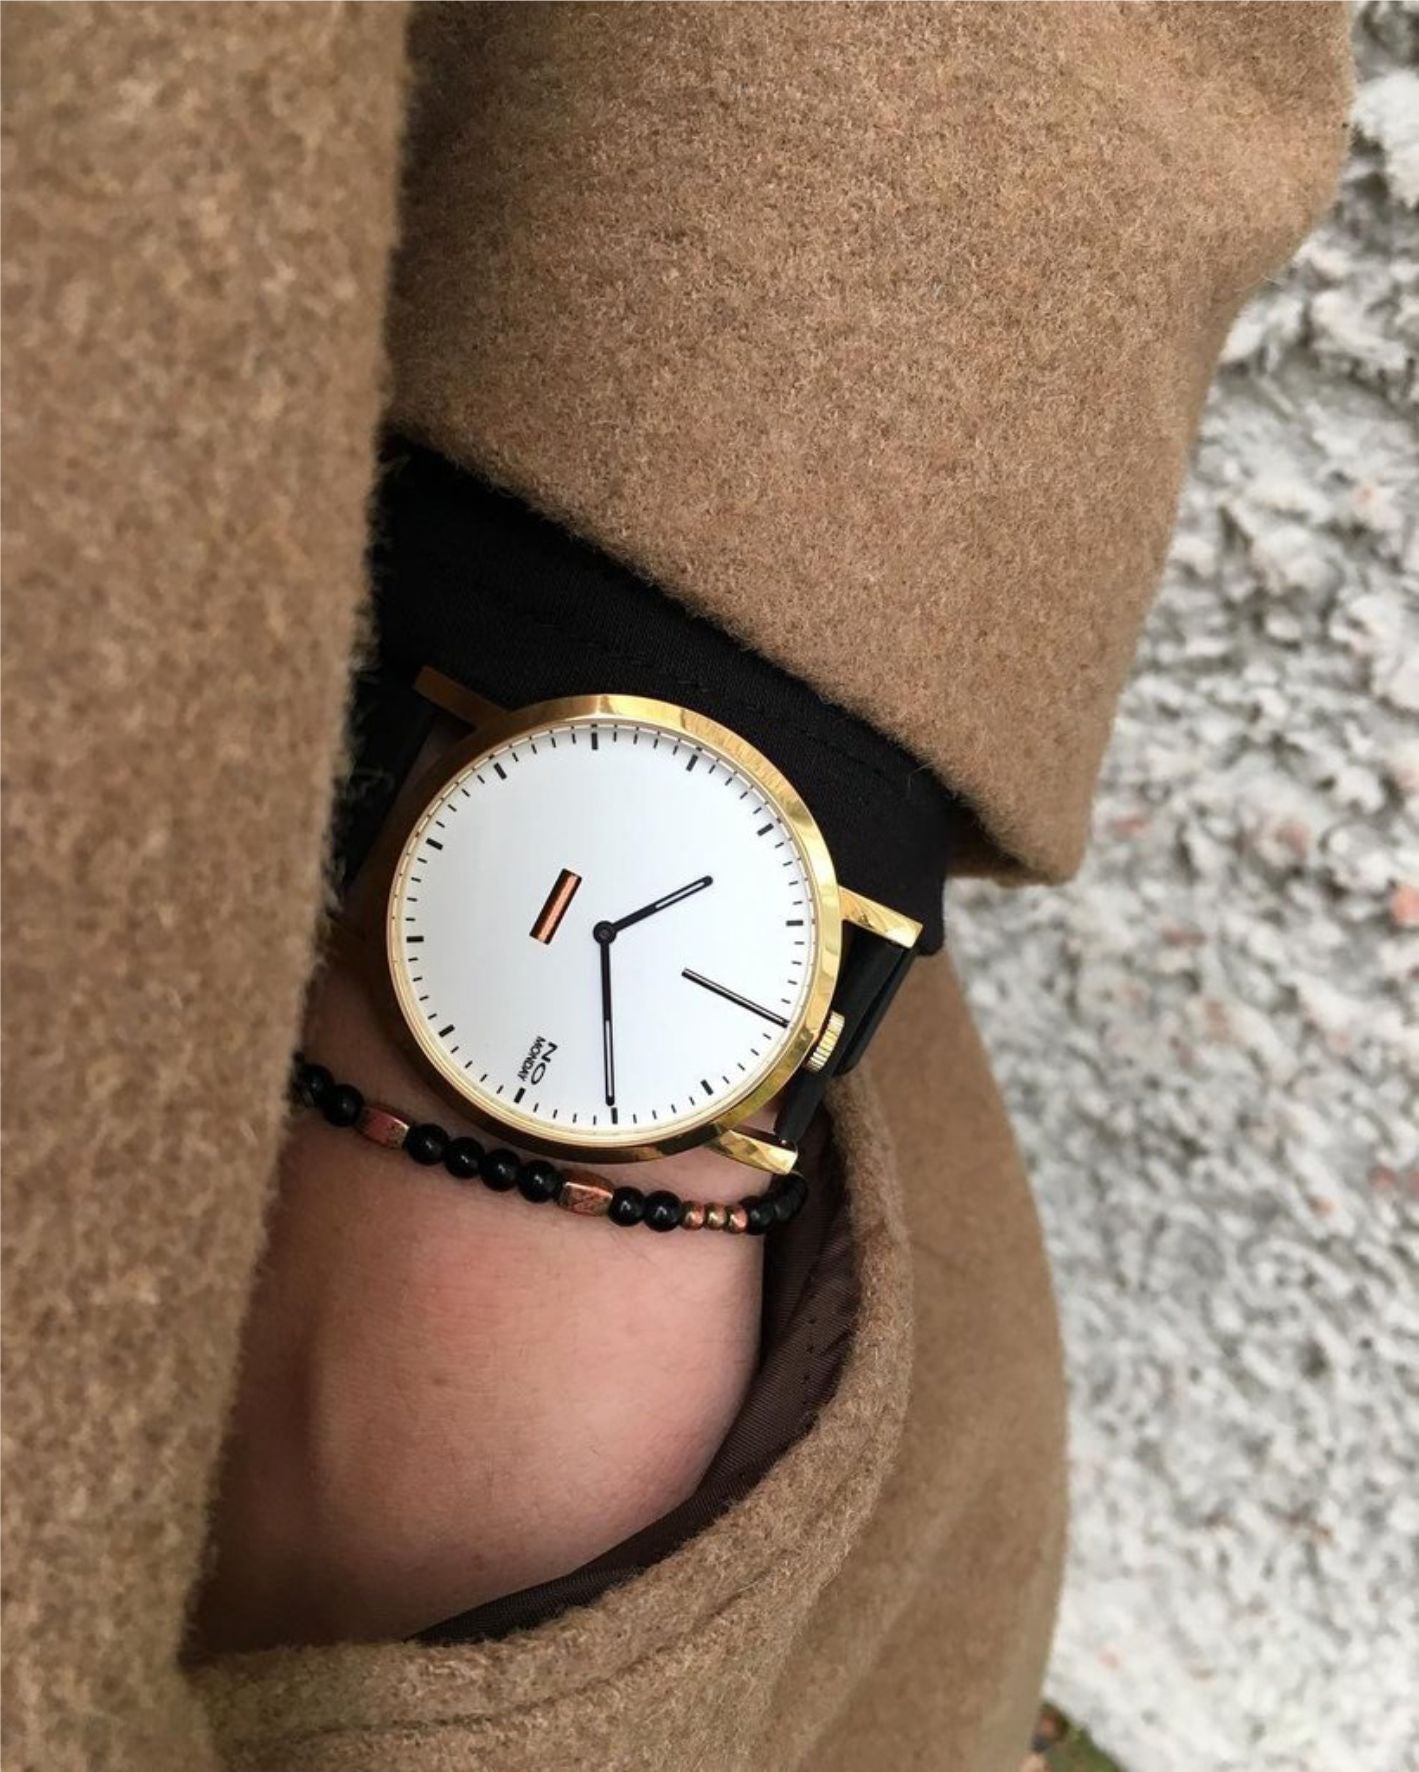 460G2 - gold mirror / white dial / brown band